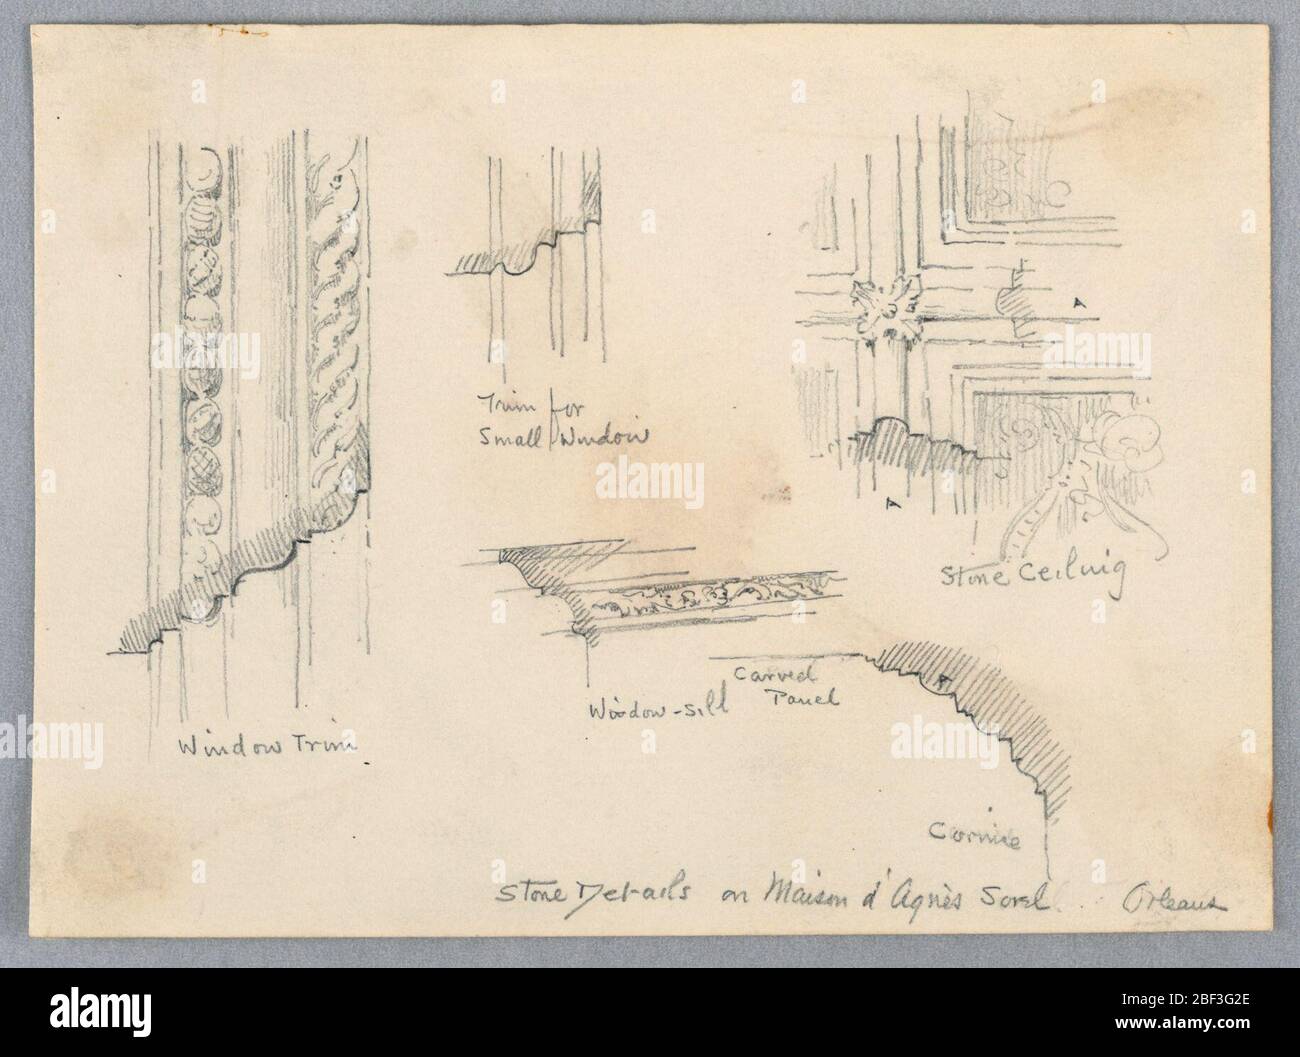 Sketches of Architectural Details from Agnes Sorels House Orans. Sketches of window details and ceiling mouldings, all labelled. Stock Photo